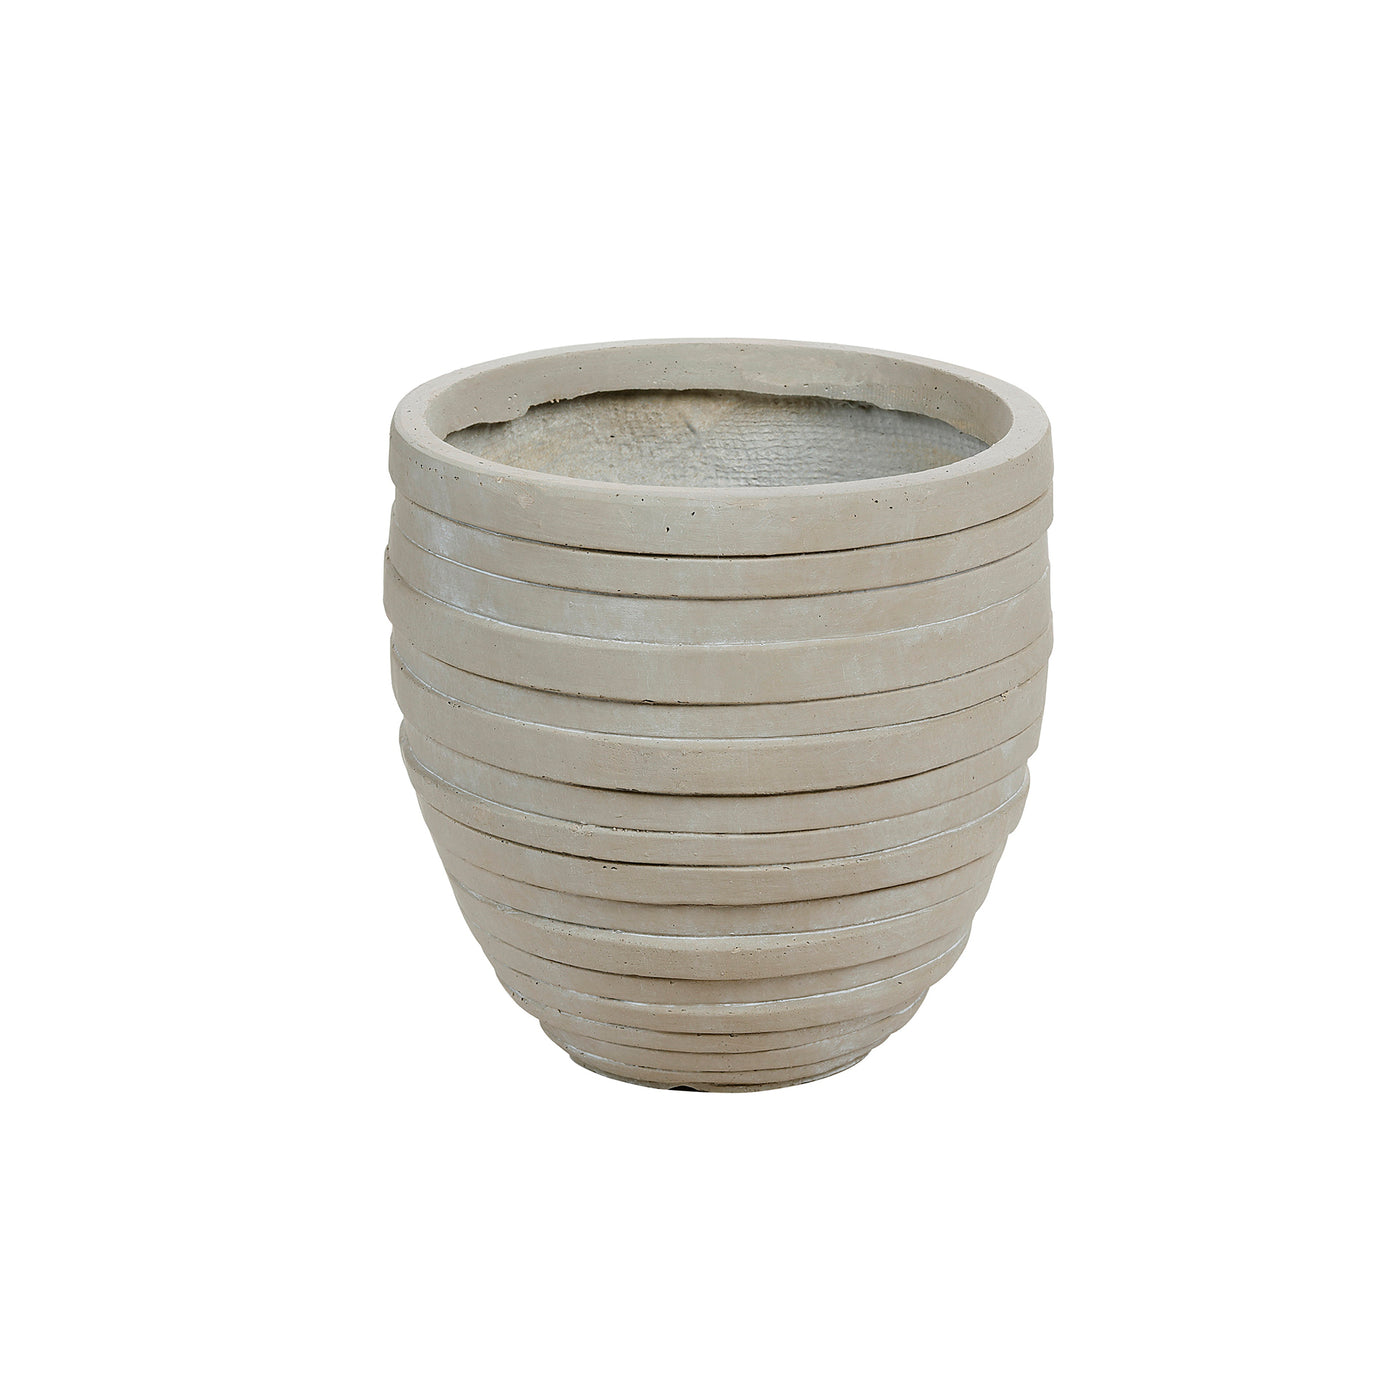 High-quality horizontal striped textured planter in light grey